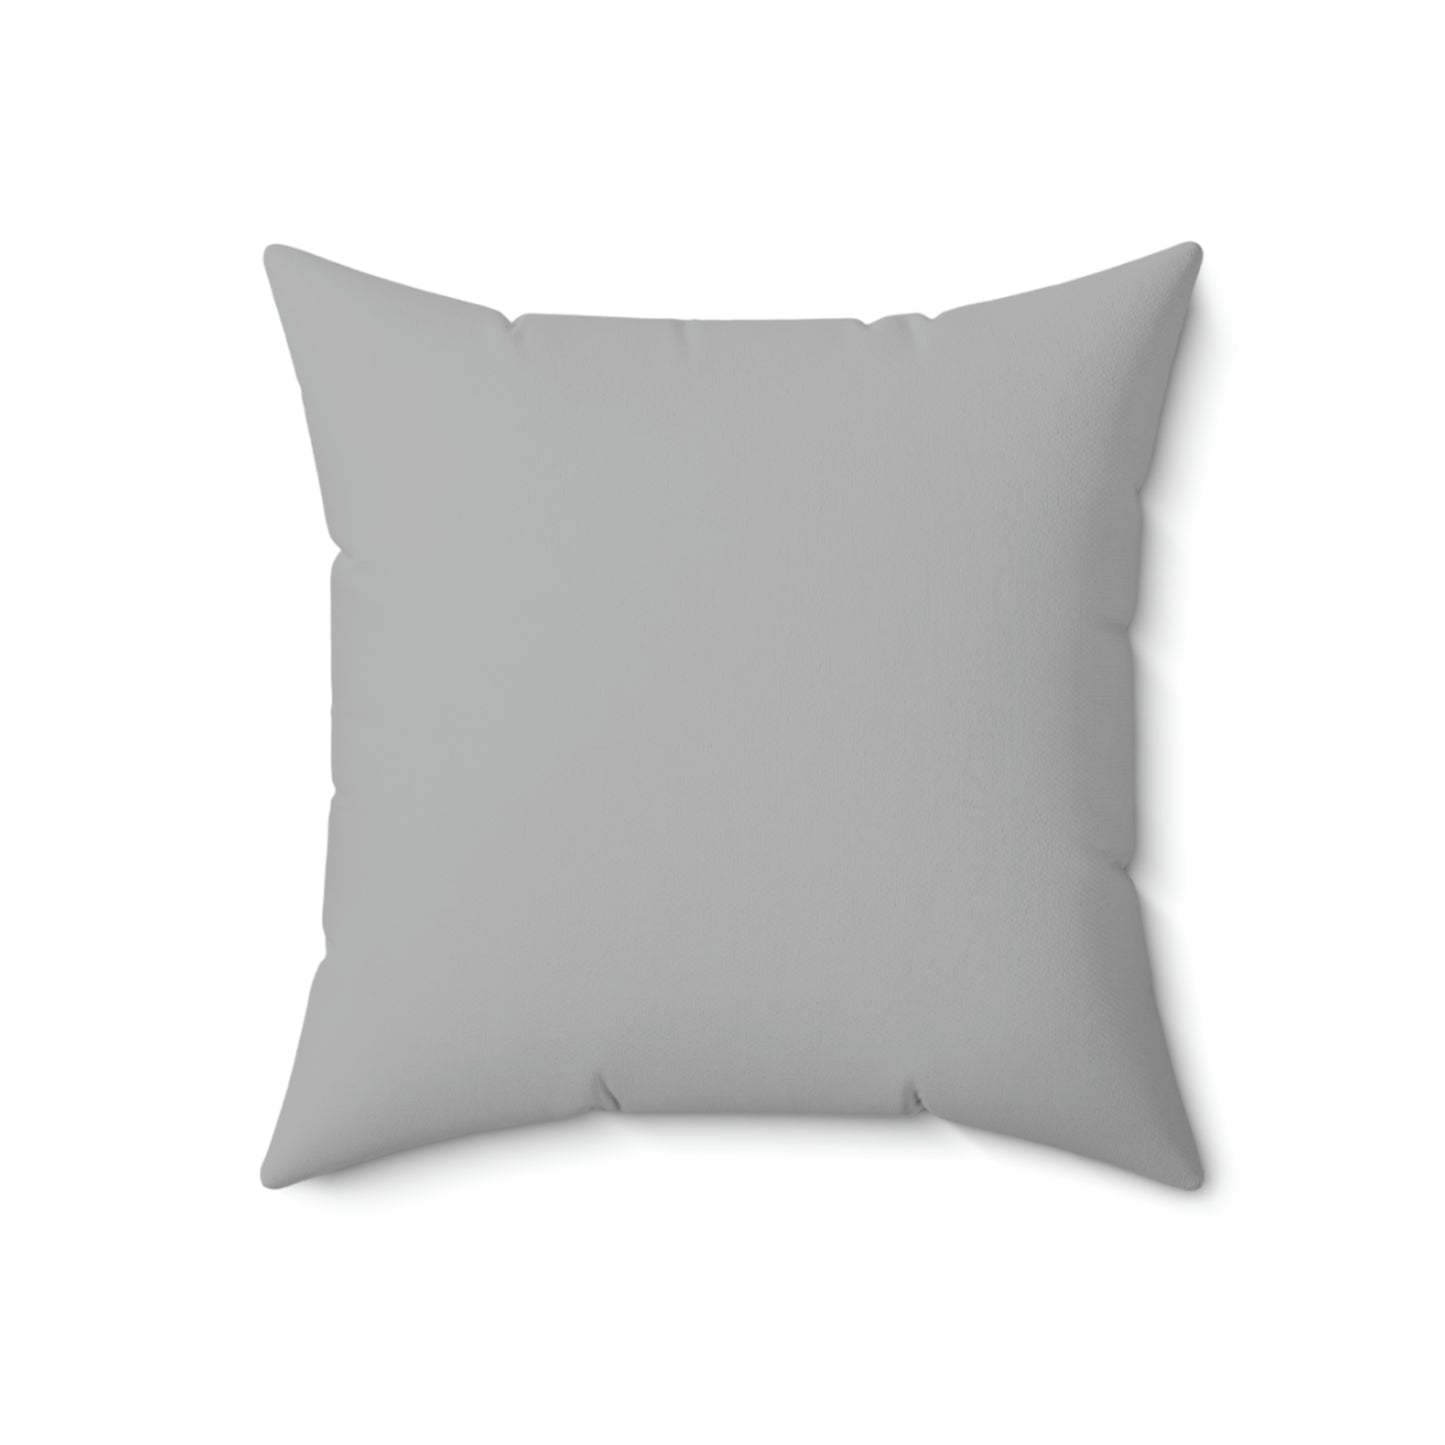 Spun Polyester Square Pillow Case "Mom Wow on Light Gray”